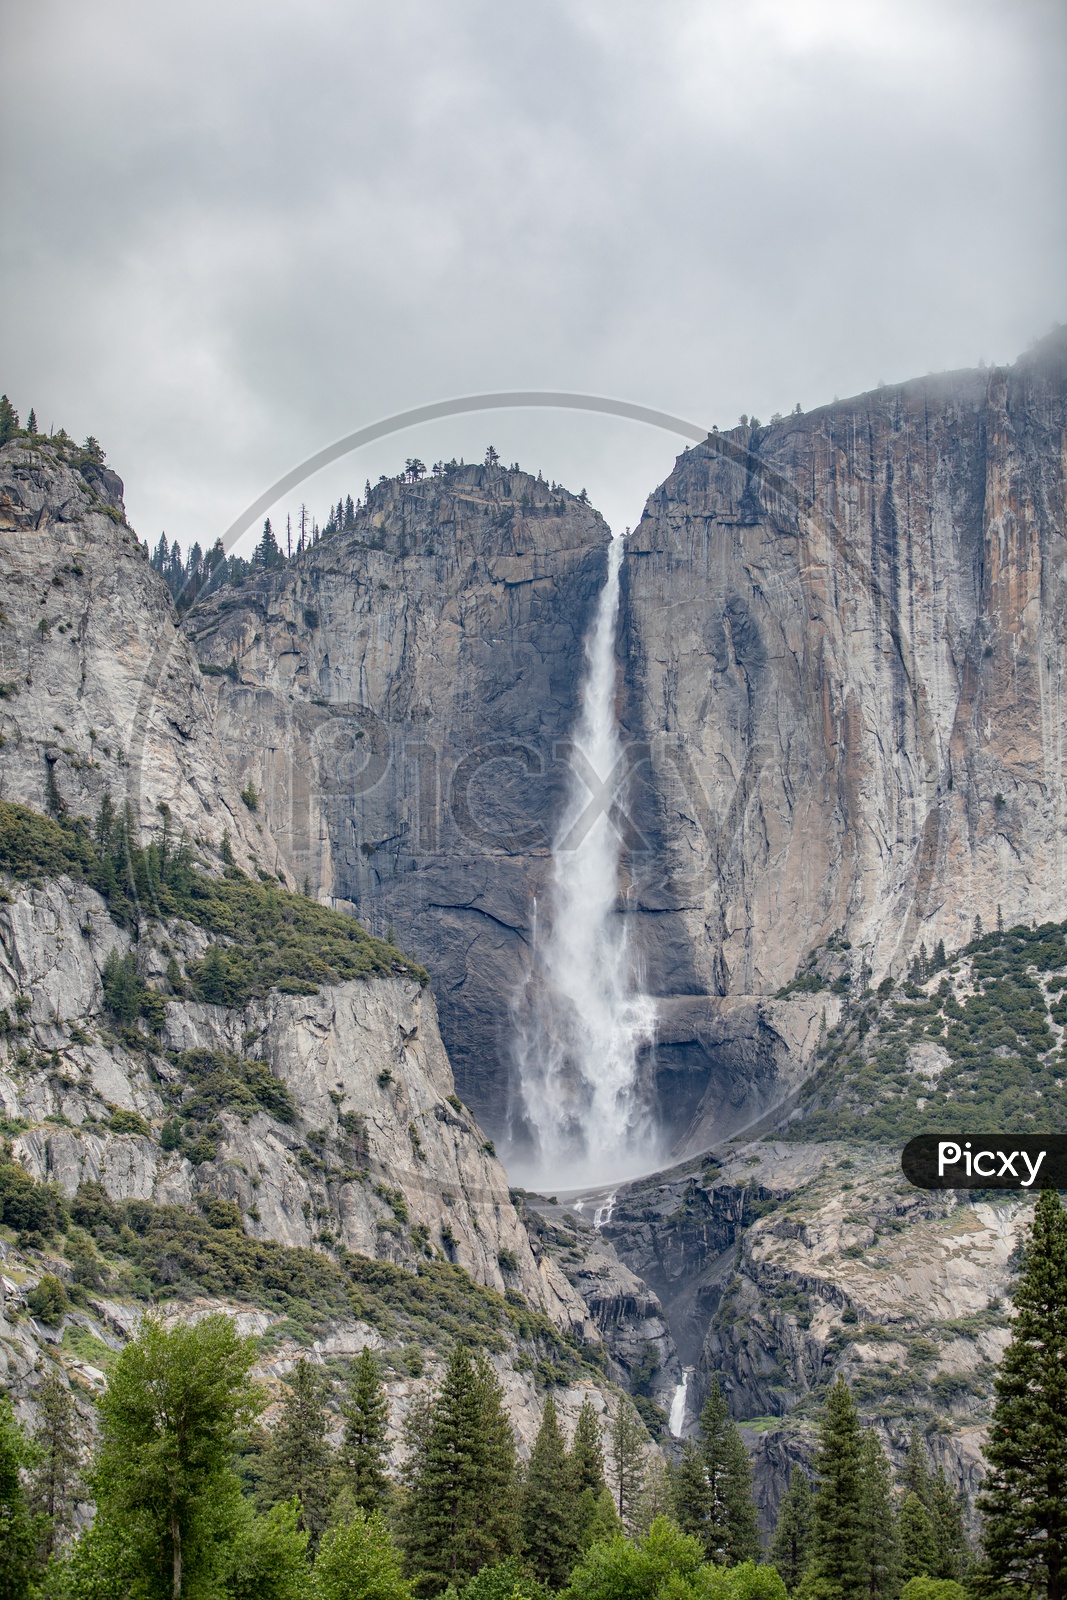 A Beautiful Water Falls Falling From The Mountains in Yosemite Valley